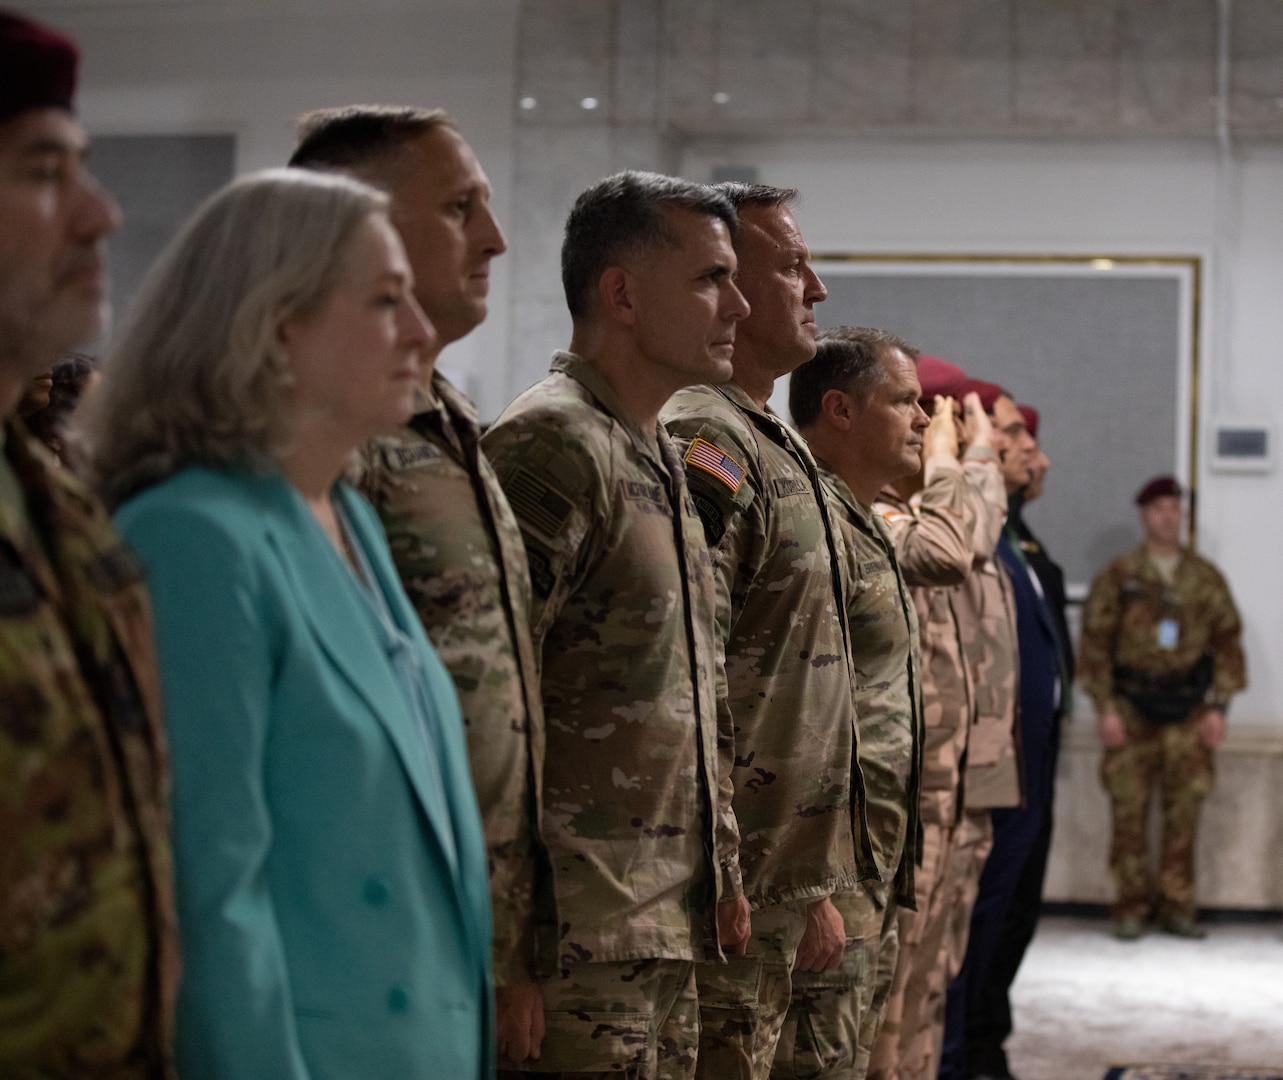 U.S. Army Maj. Gen. Matthew McFarlane, left, incoming commander of Combined Joint Task Force – Operation Inherent Resolve, Gen. Michael E. Kurilla, commander of U.S. Central Command, and Maj. Gen. John W. Brennan, outgoing commander of CJTF-OIR, pay respect during the playing of the national anthems at a transfer of authority ceremony in Baghdad, Iraq, Sept. 8 2022. CJTF-OIR remains steadfast in its commitment to advise, assist and enable partner forces in designated areas of Iraq and Syria as they secure the enduring defeat of Da’esh--the common Arabic term for ISIS or I.S.--and prevent the group’s reemergence. (U.S. Army photo by Sgt. Julio Hernandez)